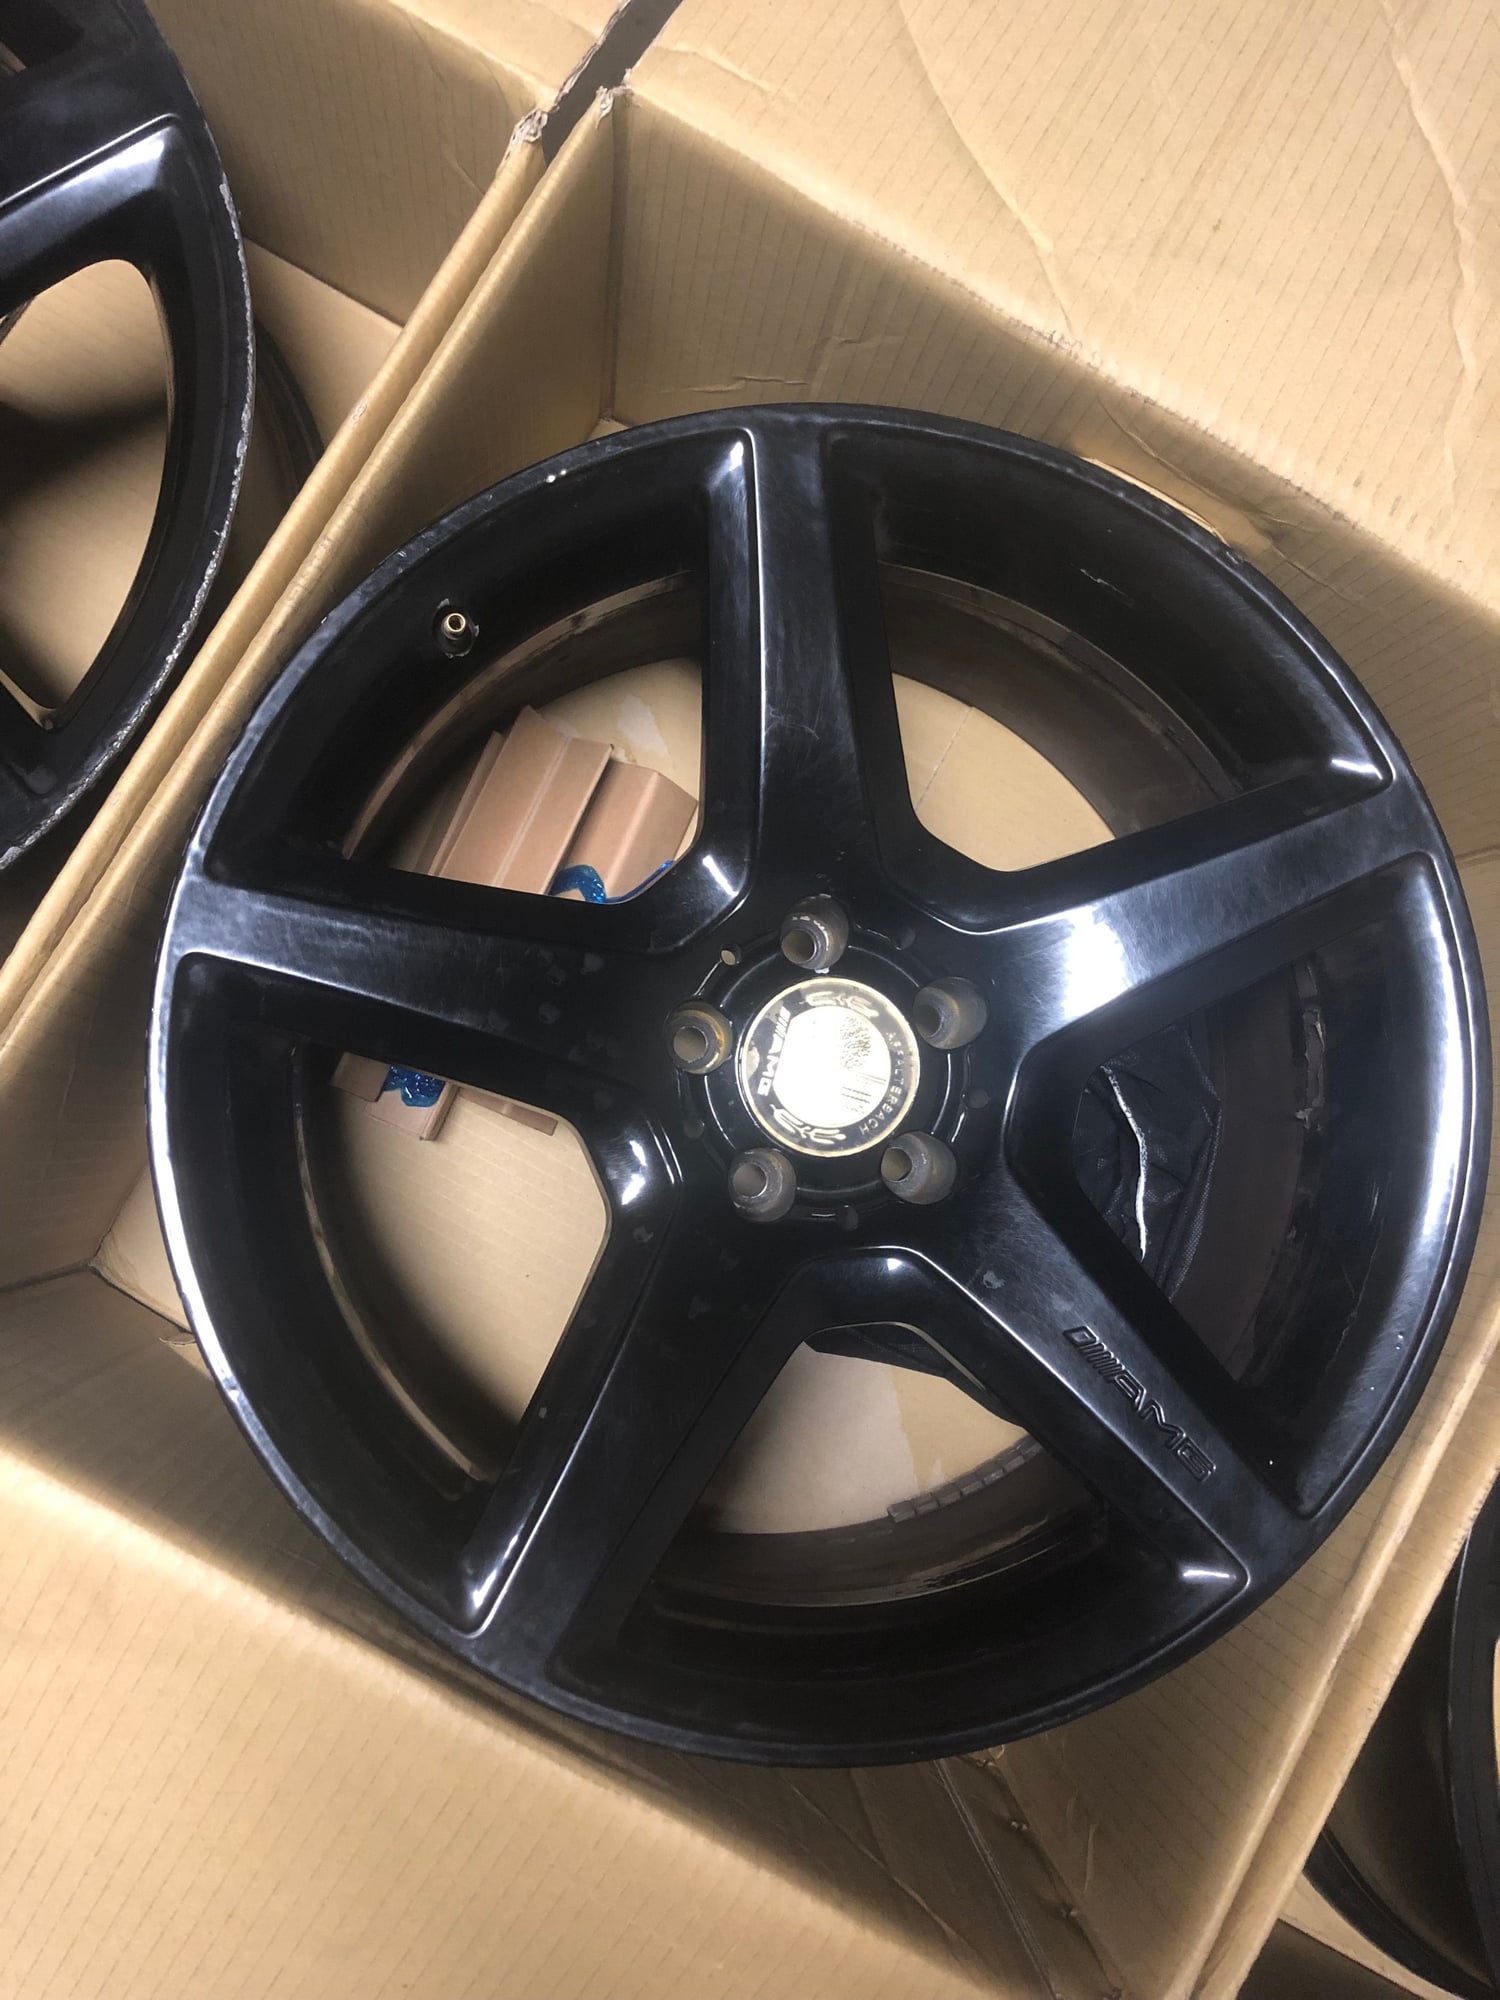 Wheels and Tires/Axles - Selling a set of Black CLS55 AMG 5 Spoke Concave Wheels!!! Make me an offer! - Used - 2006 to 2008 Mercedes-Benz CLS55 AMG - Dfw, TX 76051, United States